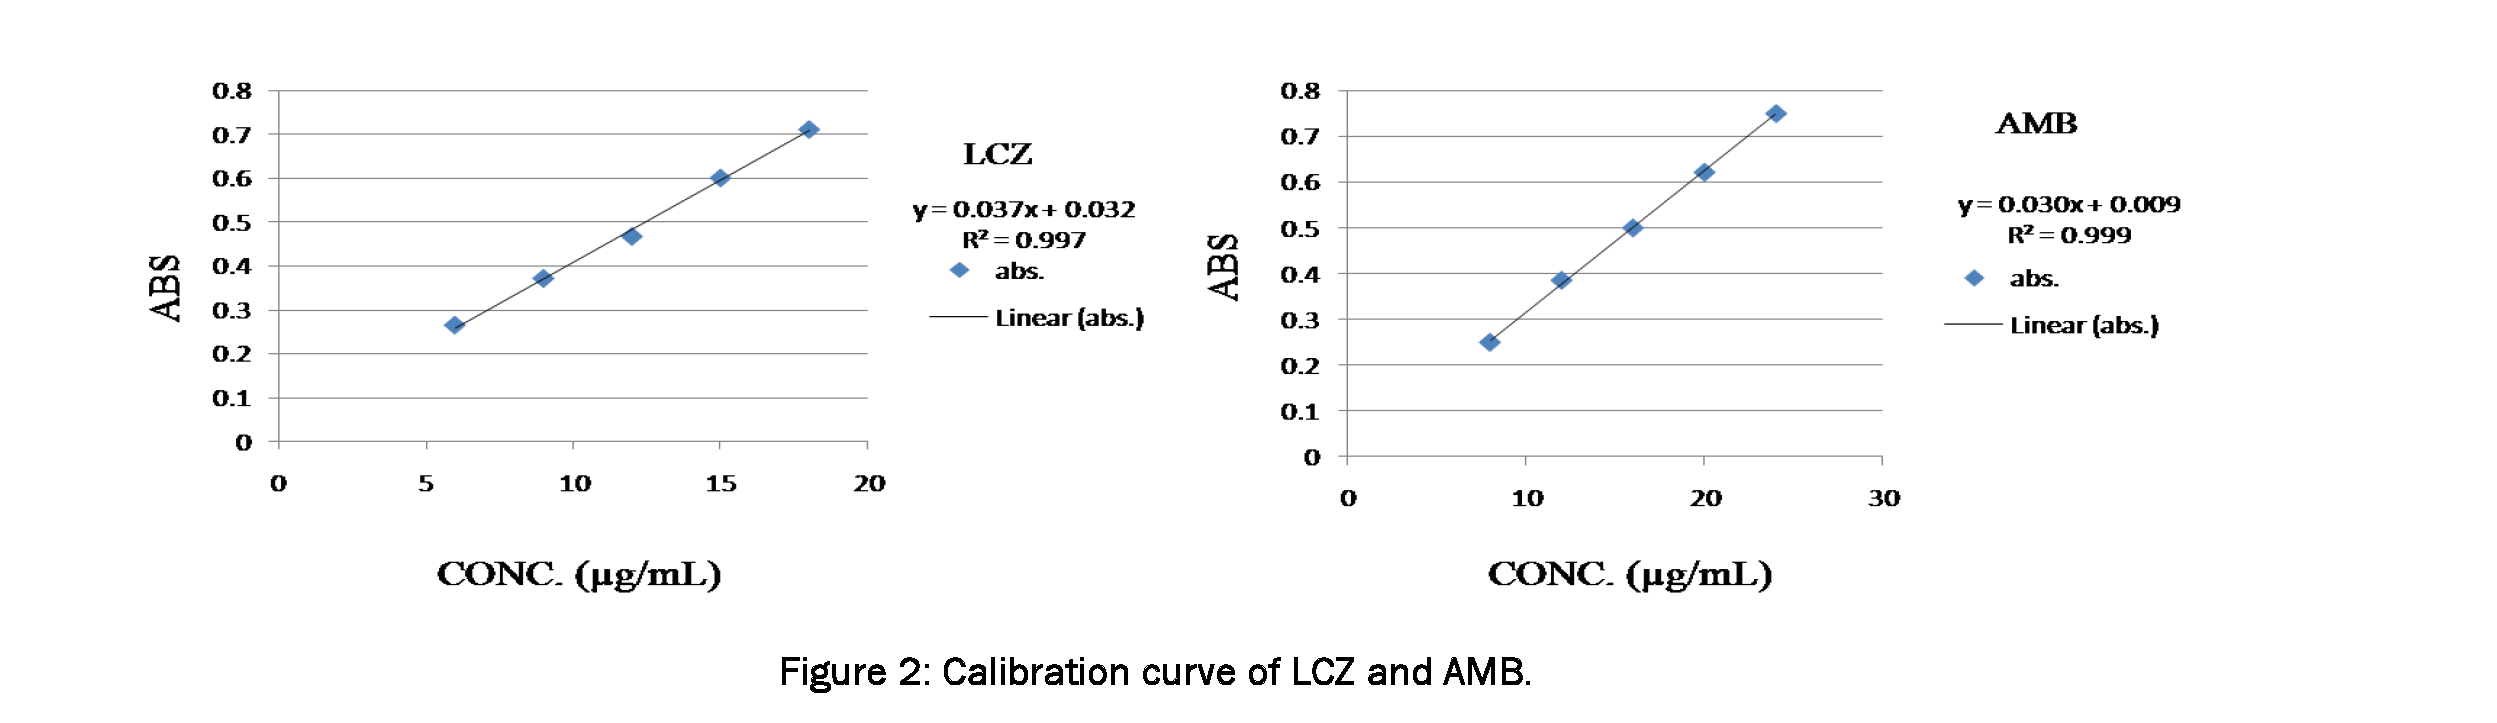 Pharmaceutical-Analysis-Calibration-curve-LCZ-and-AMB